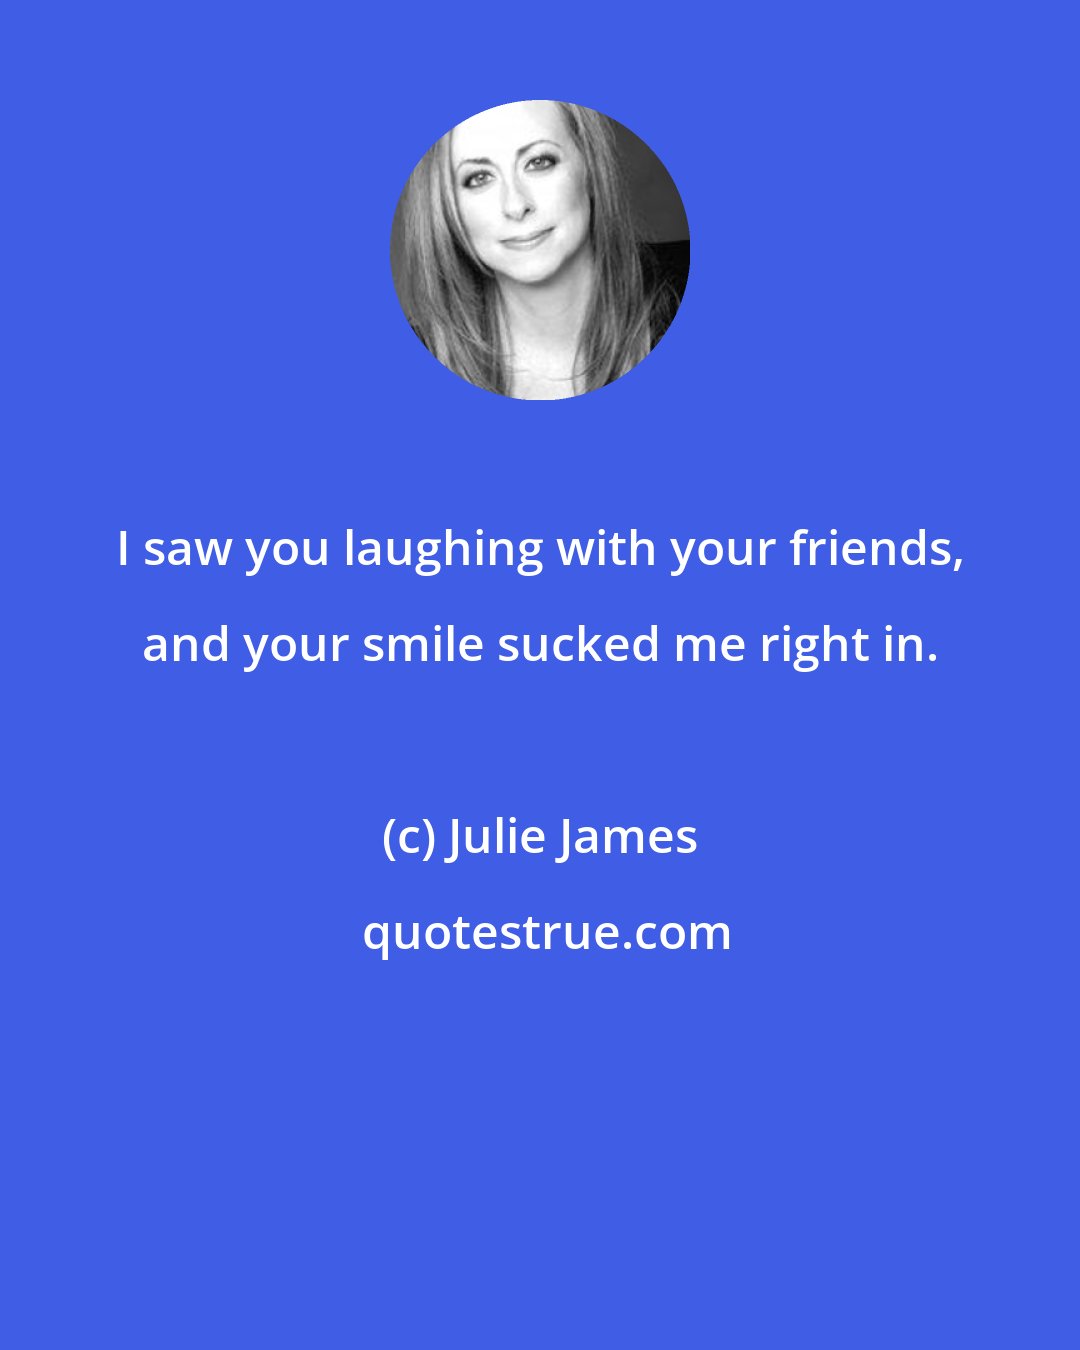 Julie James: I saw you laughing with your friends, and your smile sucked me right in.